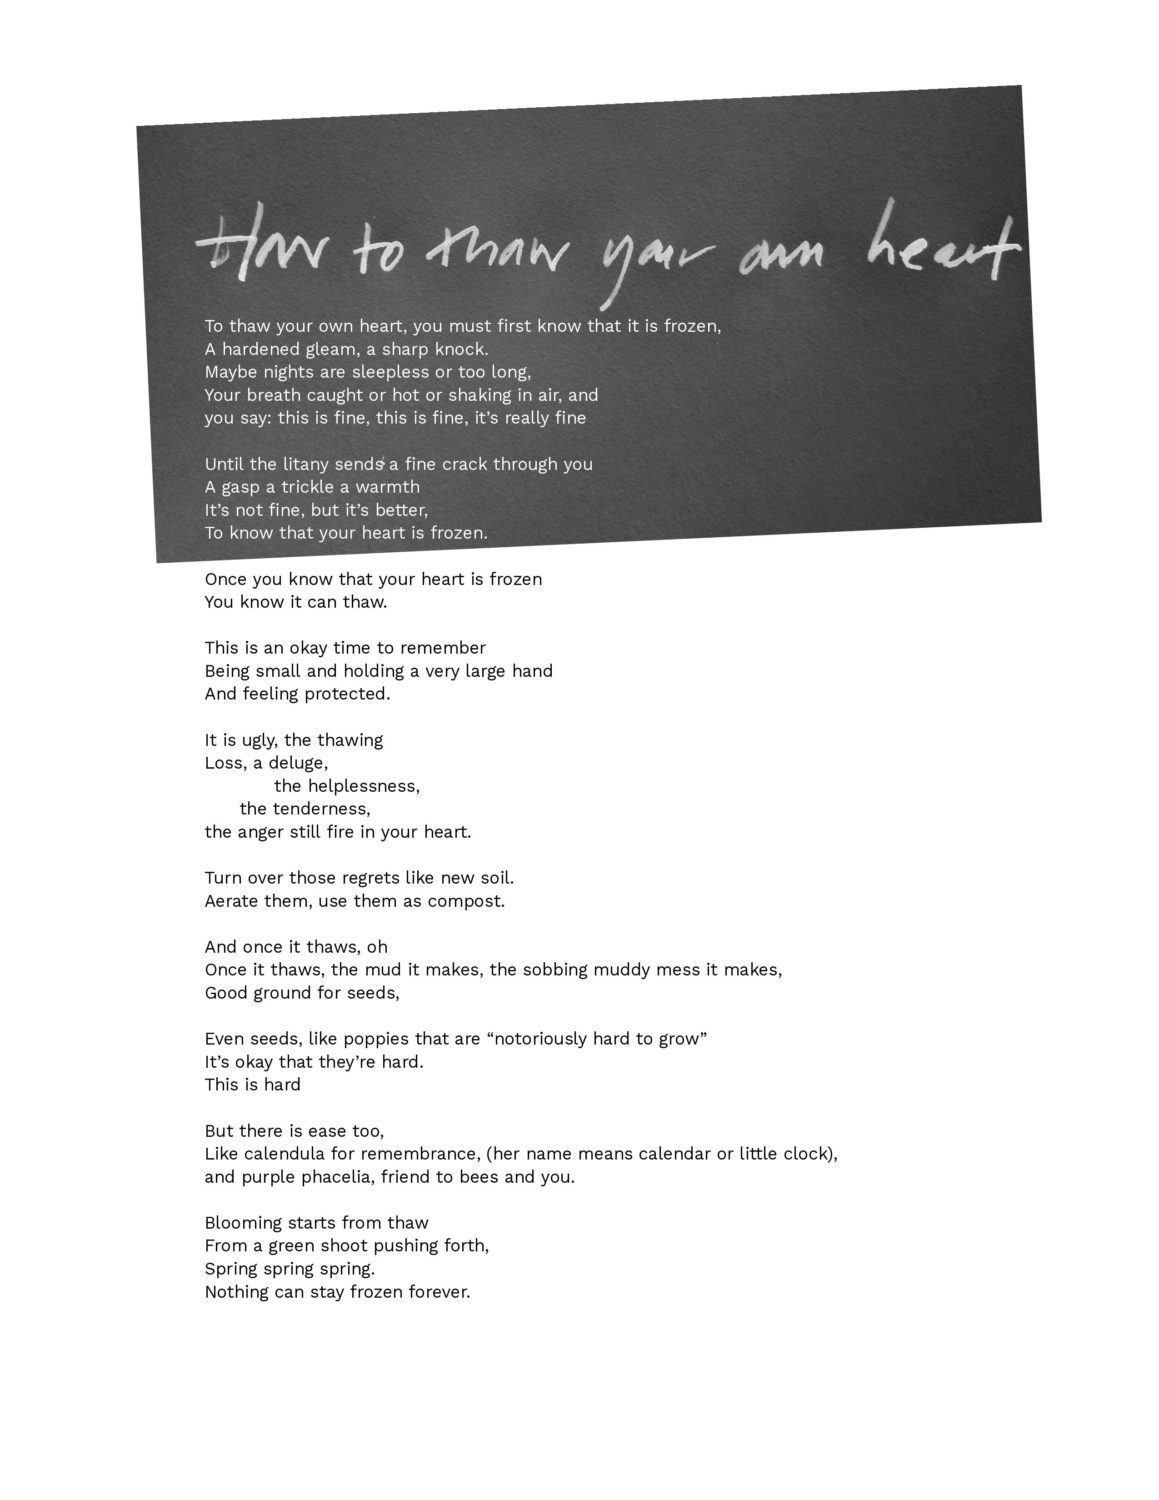 Song Lyrics About Grief and Loss